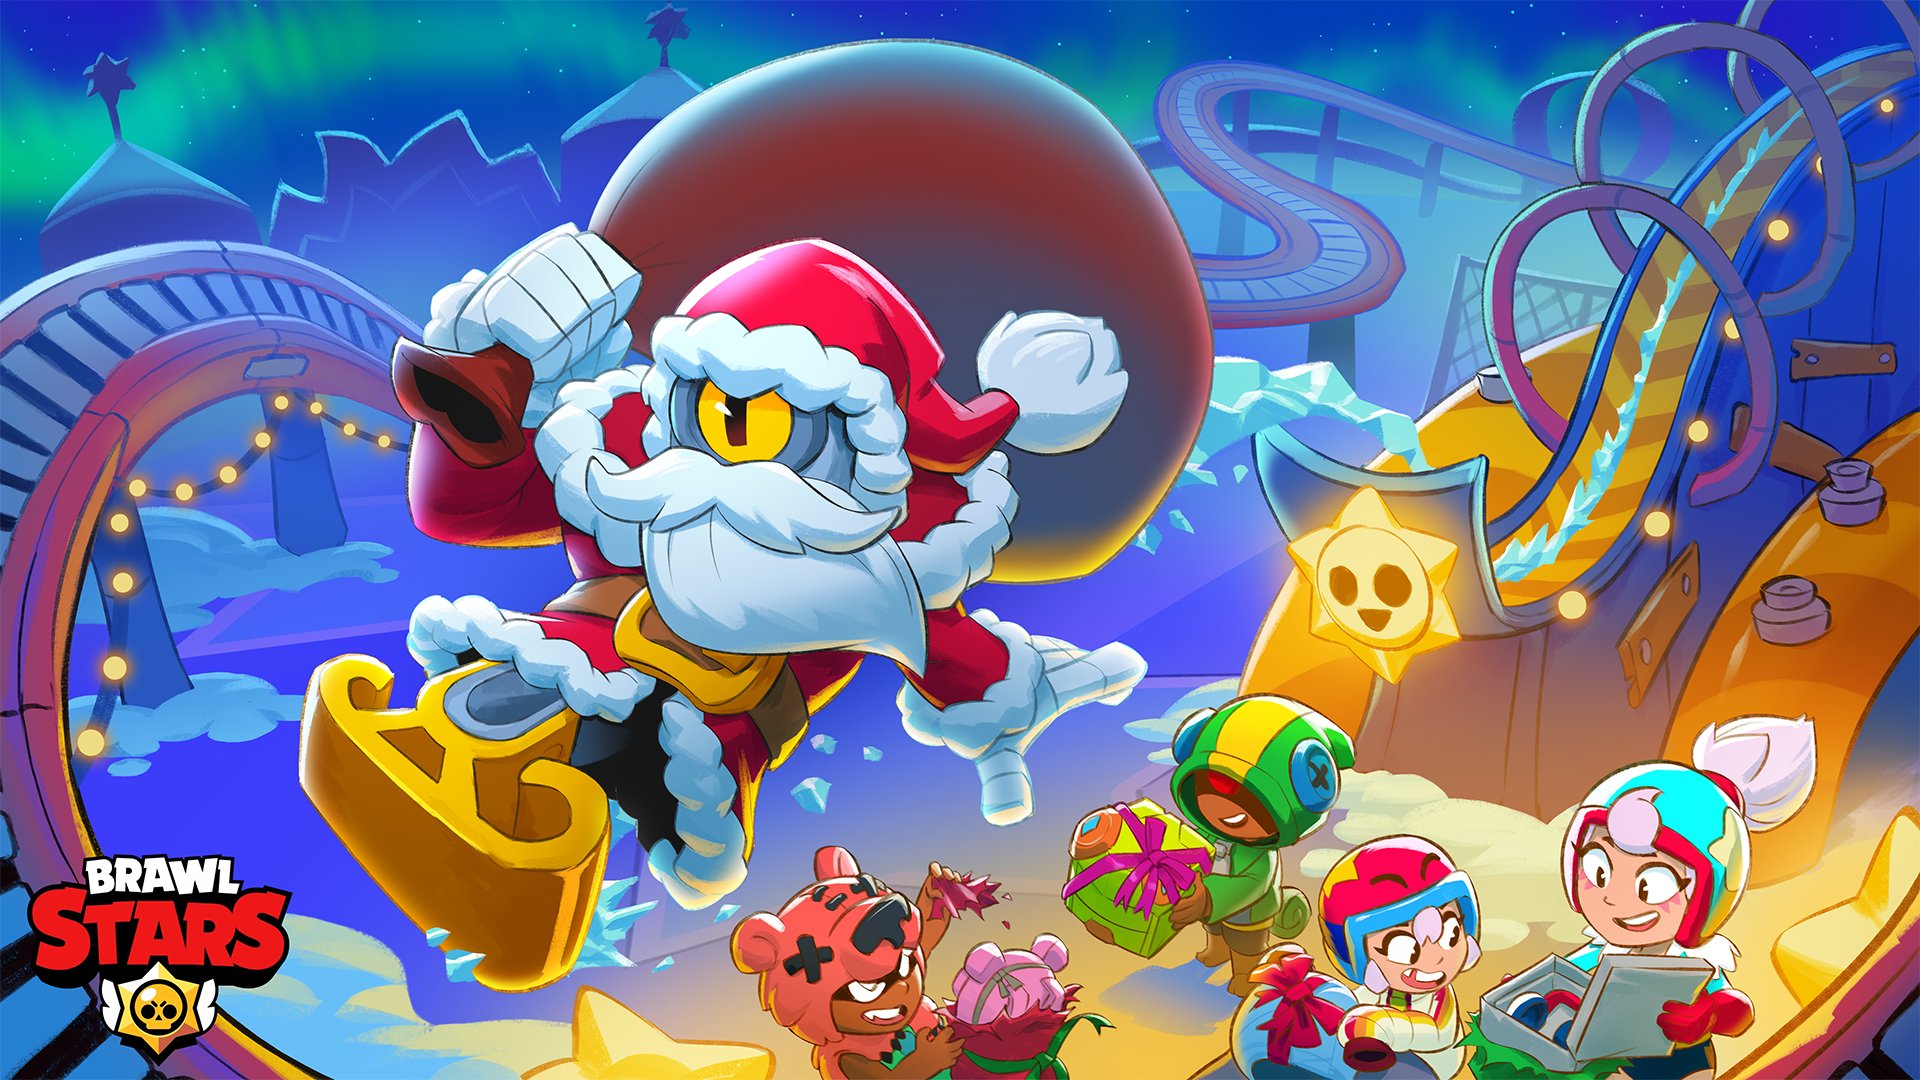 Brawl Stars on X: 🎅 Santa Stu is out and about delivering gifts in style!  🎅 What's the perfect #Brawlidays present your favorite Brawler could get?   / X